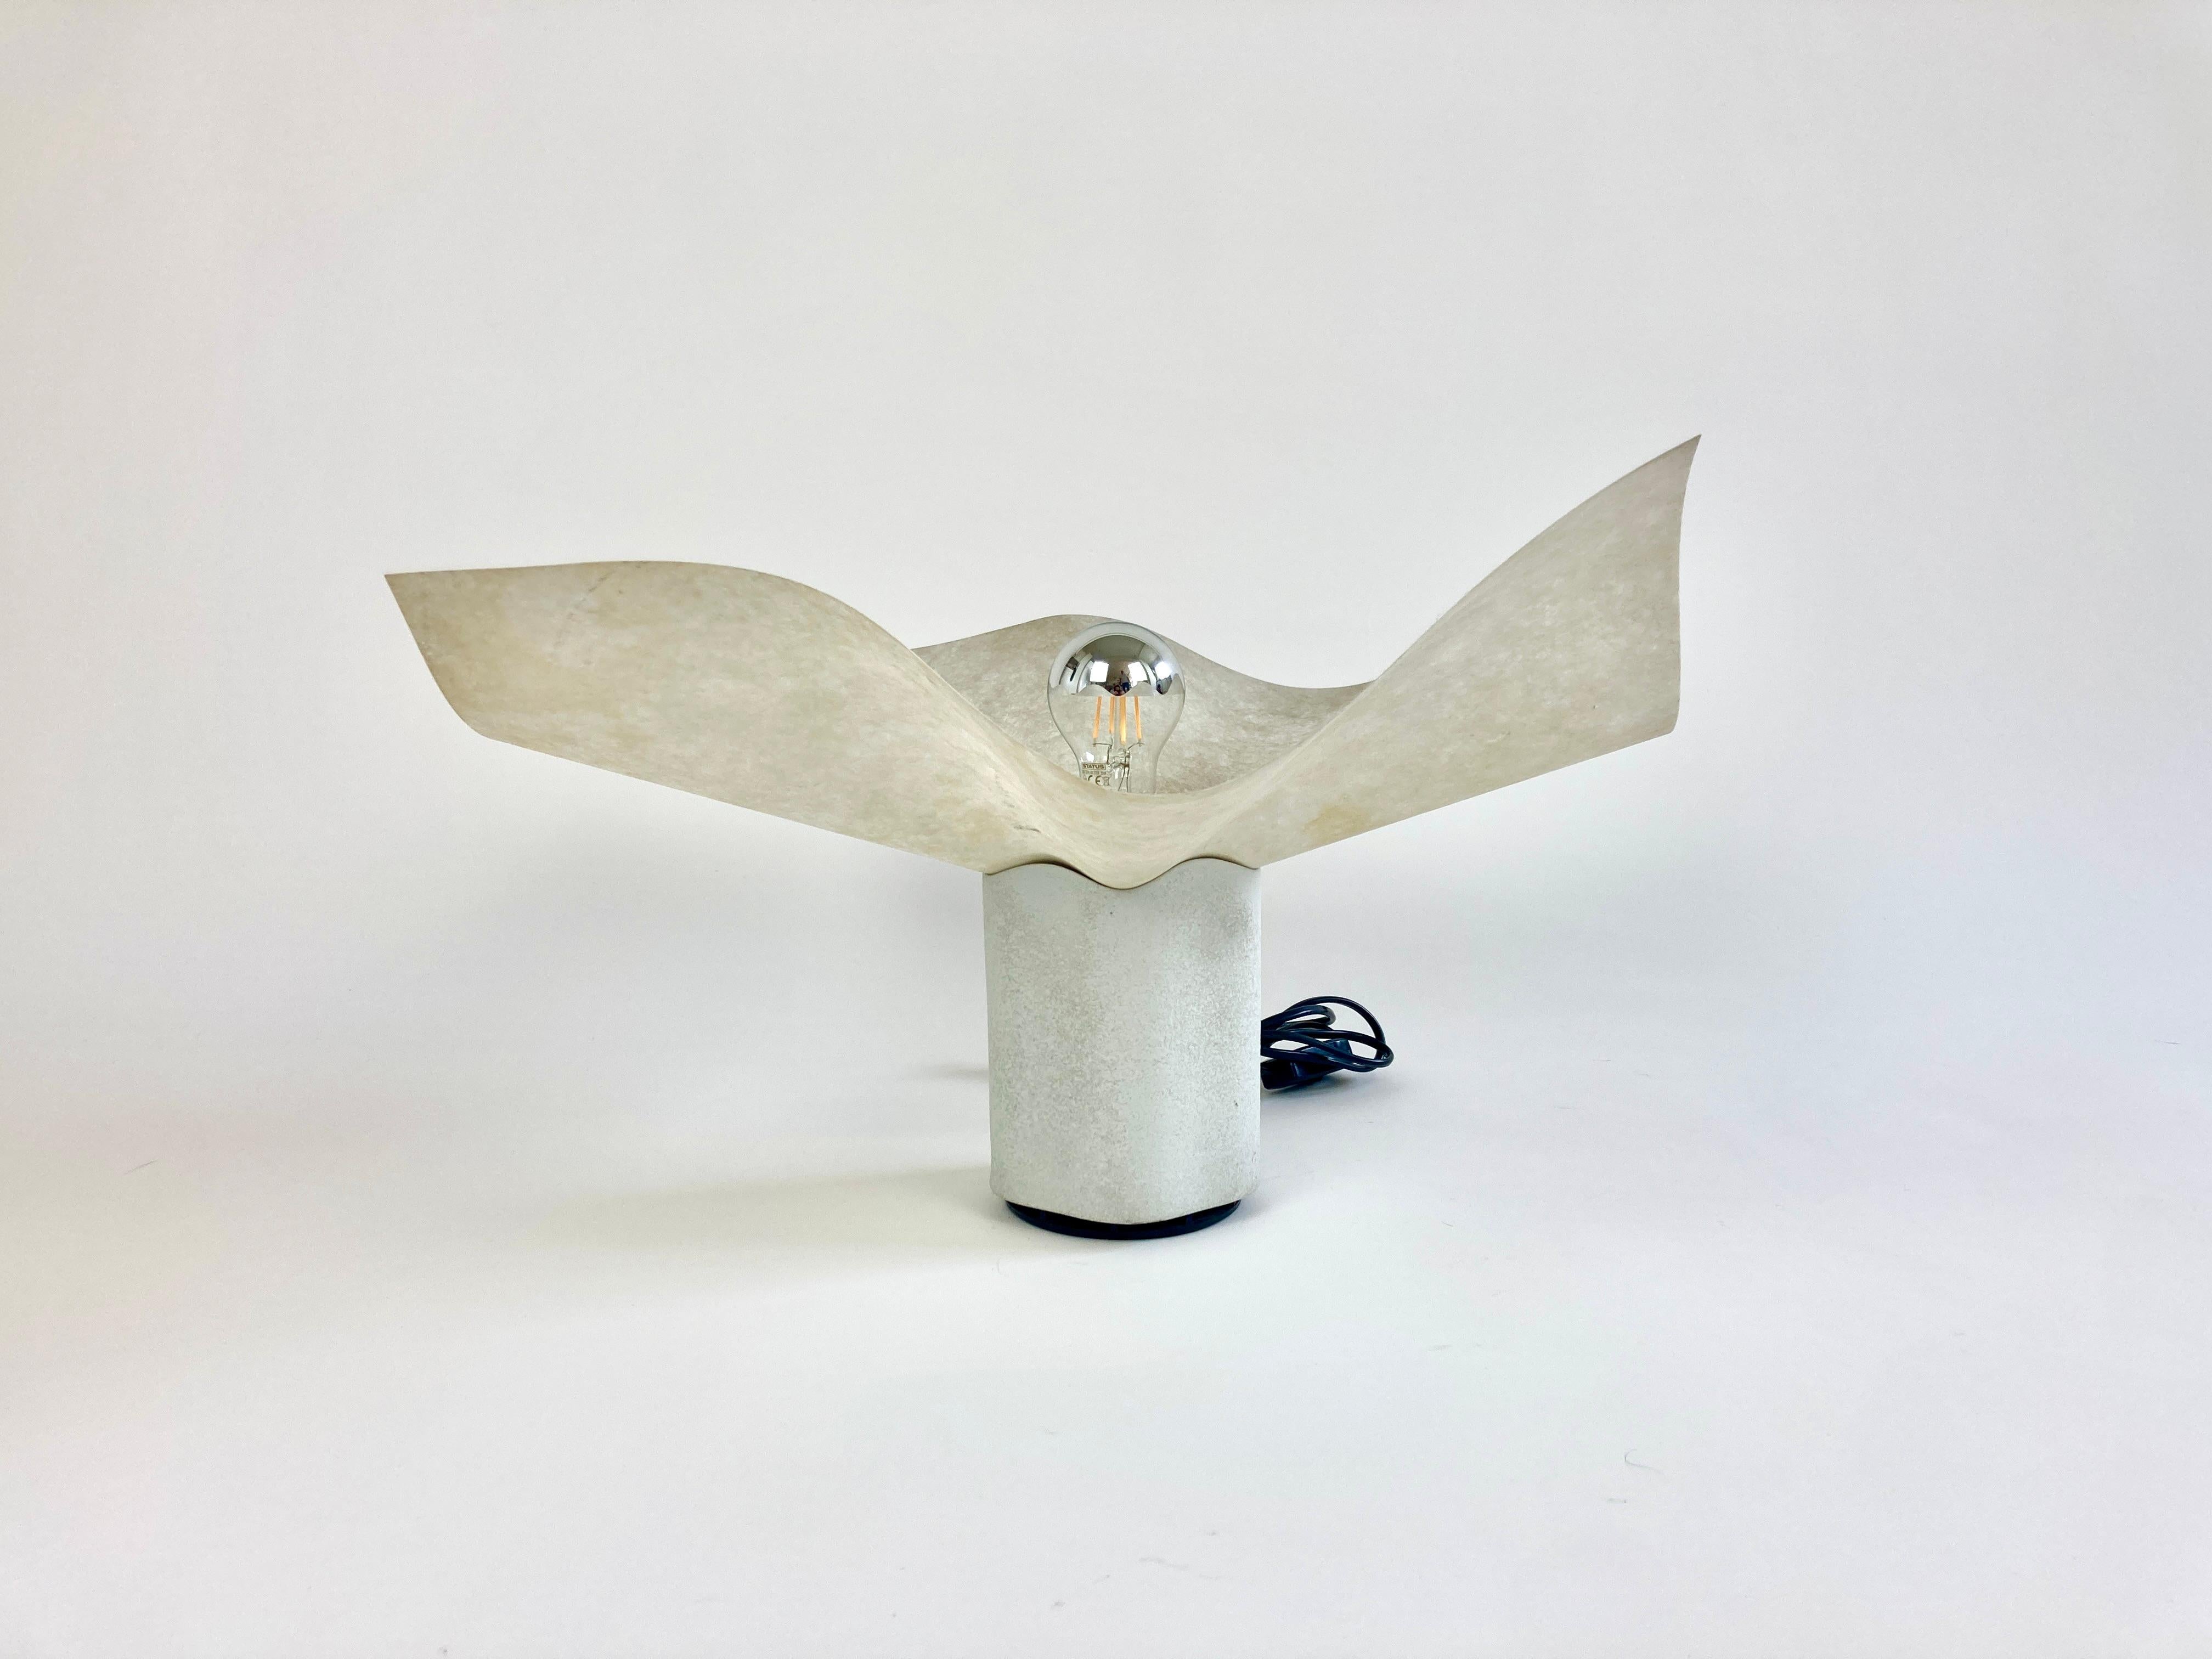  'Area 50 de tavolo' lamp by Mario Bellini for Artemide, Italy, first featured in the Artemide Catalogue 1976.

This is the mid size '20' version.

White porcelain body with a parchment colour synthetic shade. 

Can be used as a table lamp, or